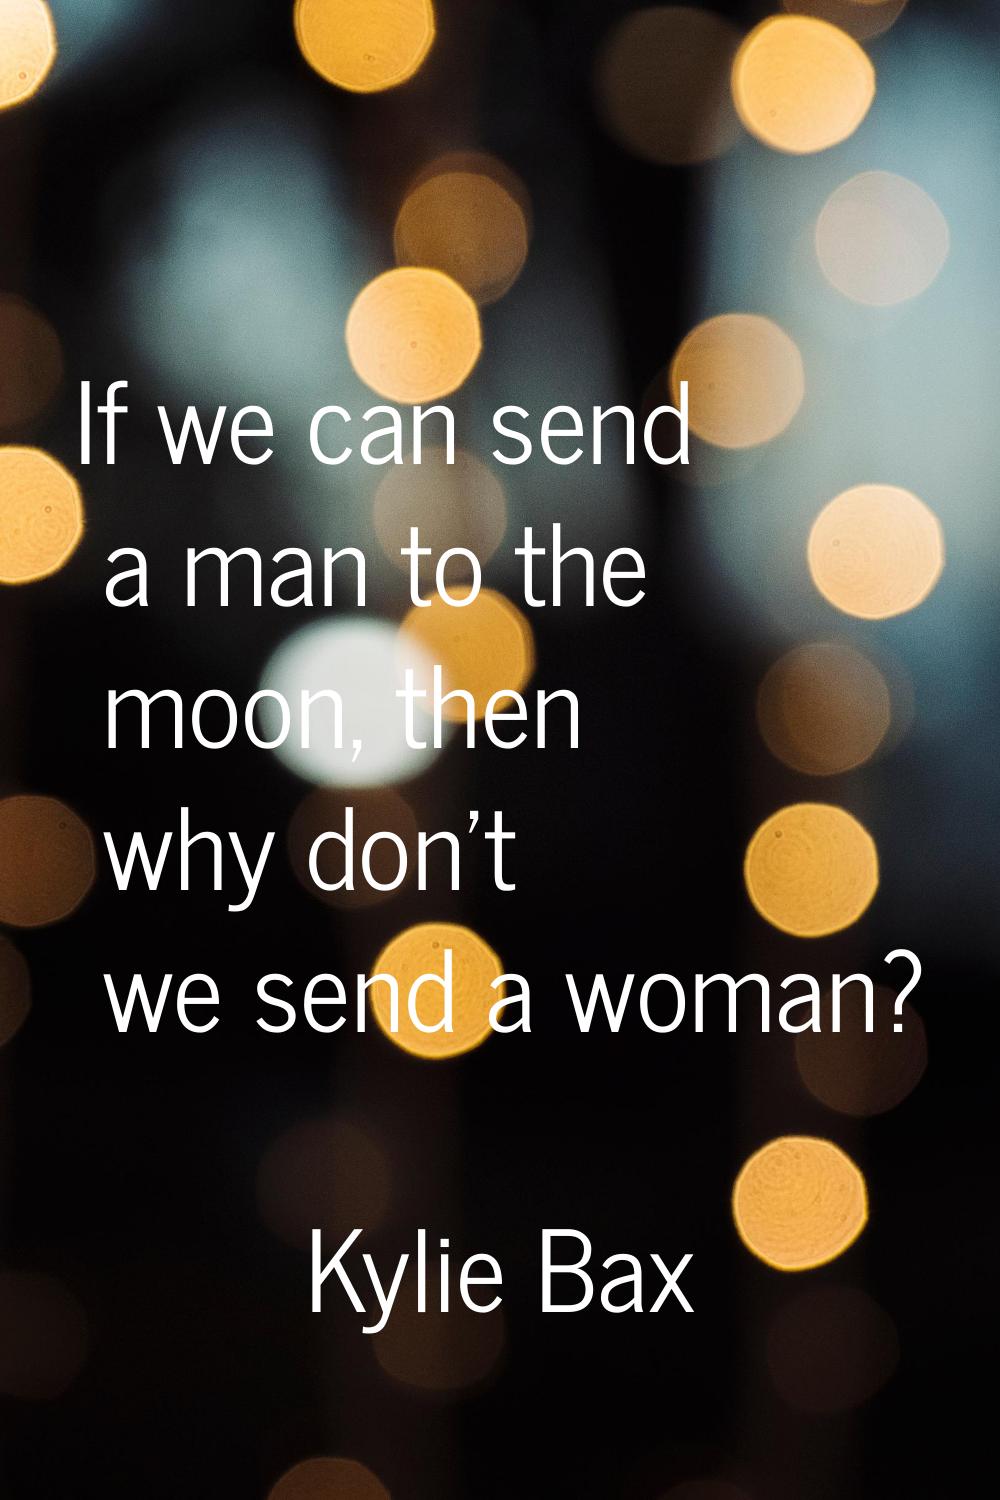 If we can send a man to the moon, then why don't we send a woman?